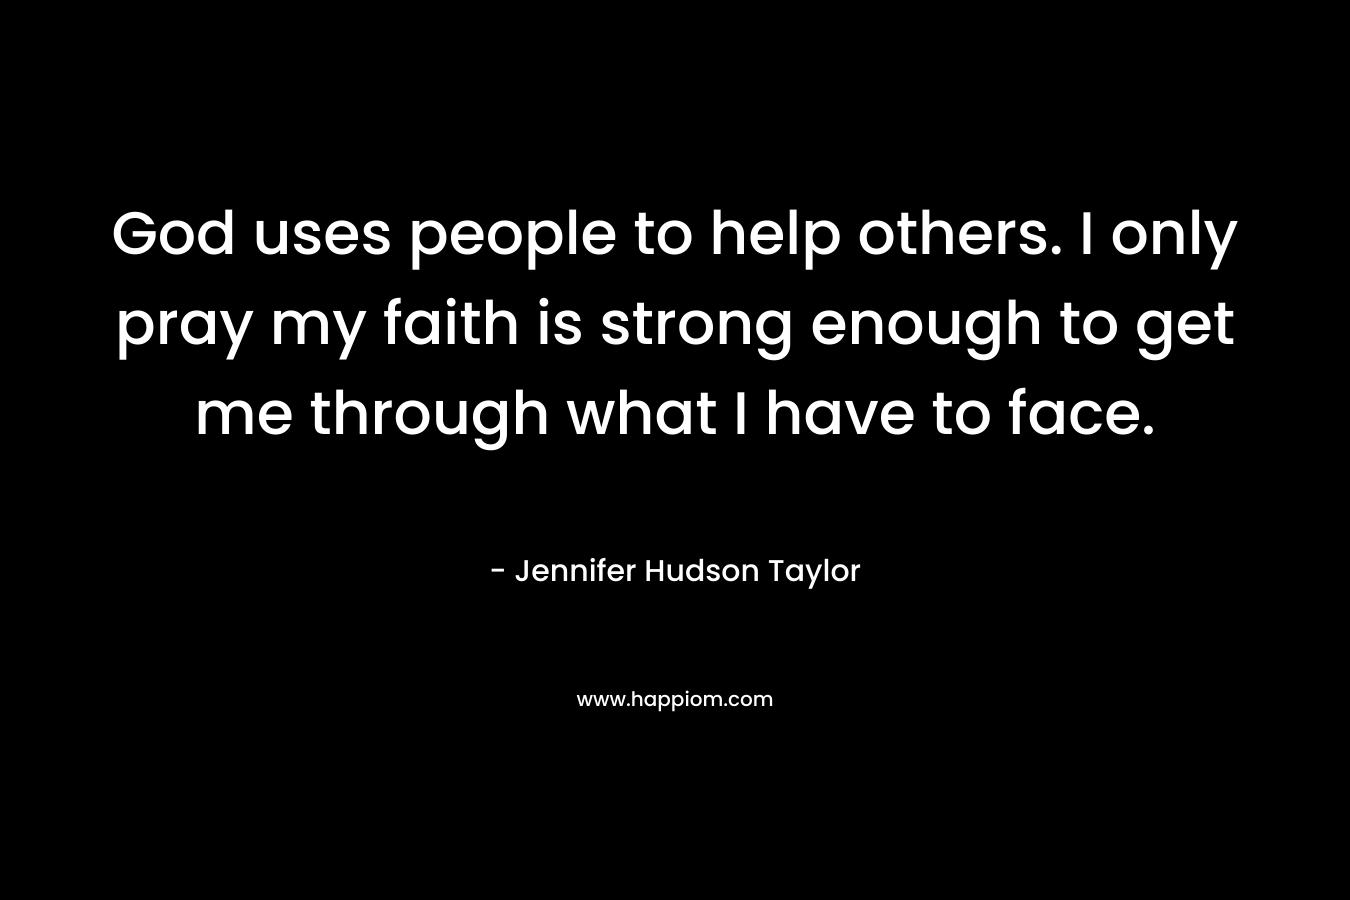 God uses people to help others. I only pray my faith is strong enough to get me through what I have to face. – Jennifer Hudson Taylor